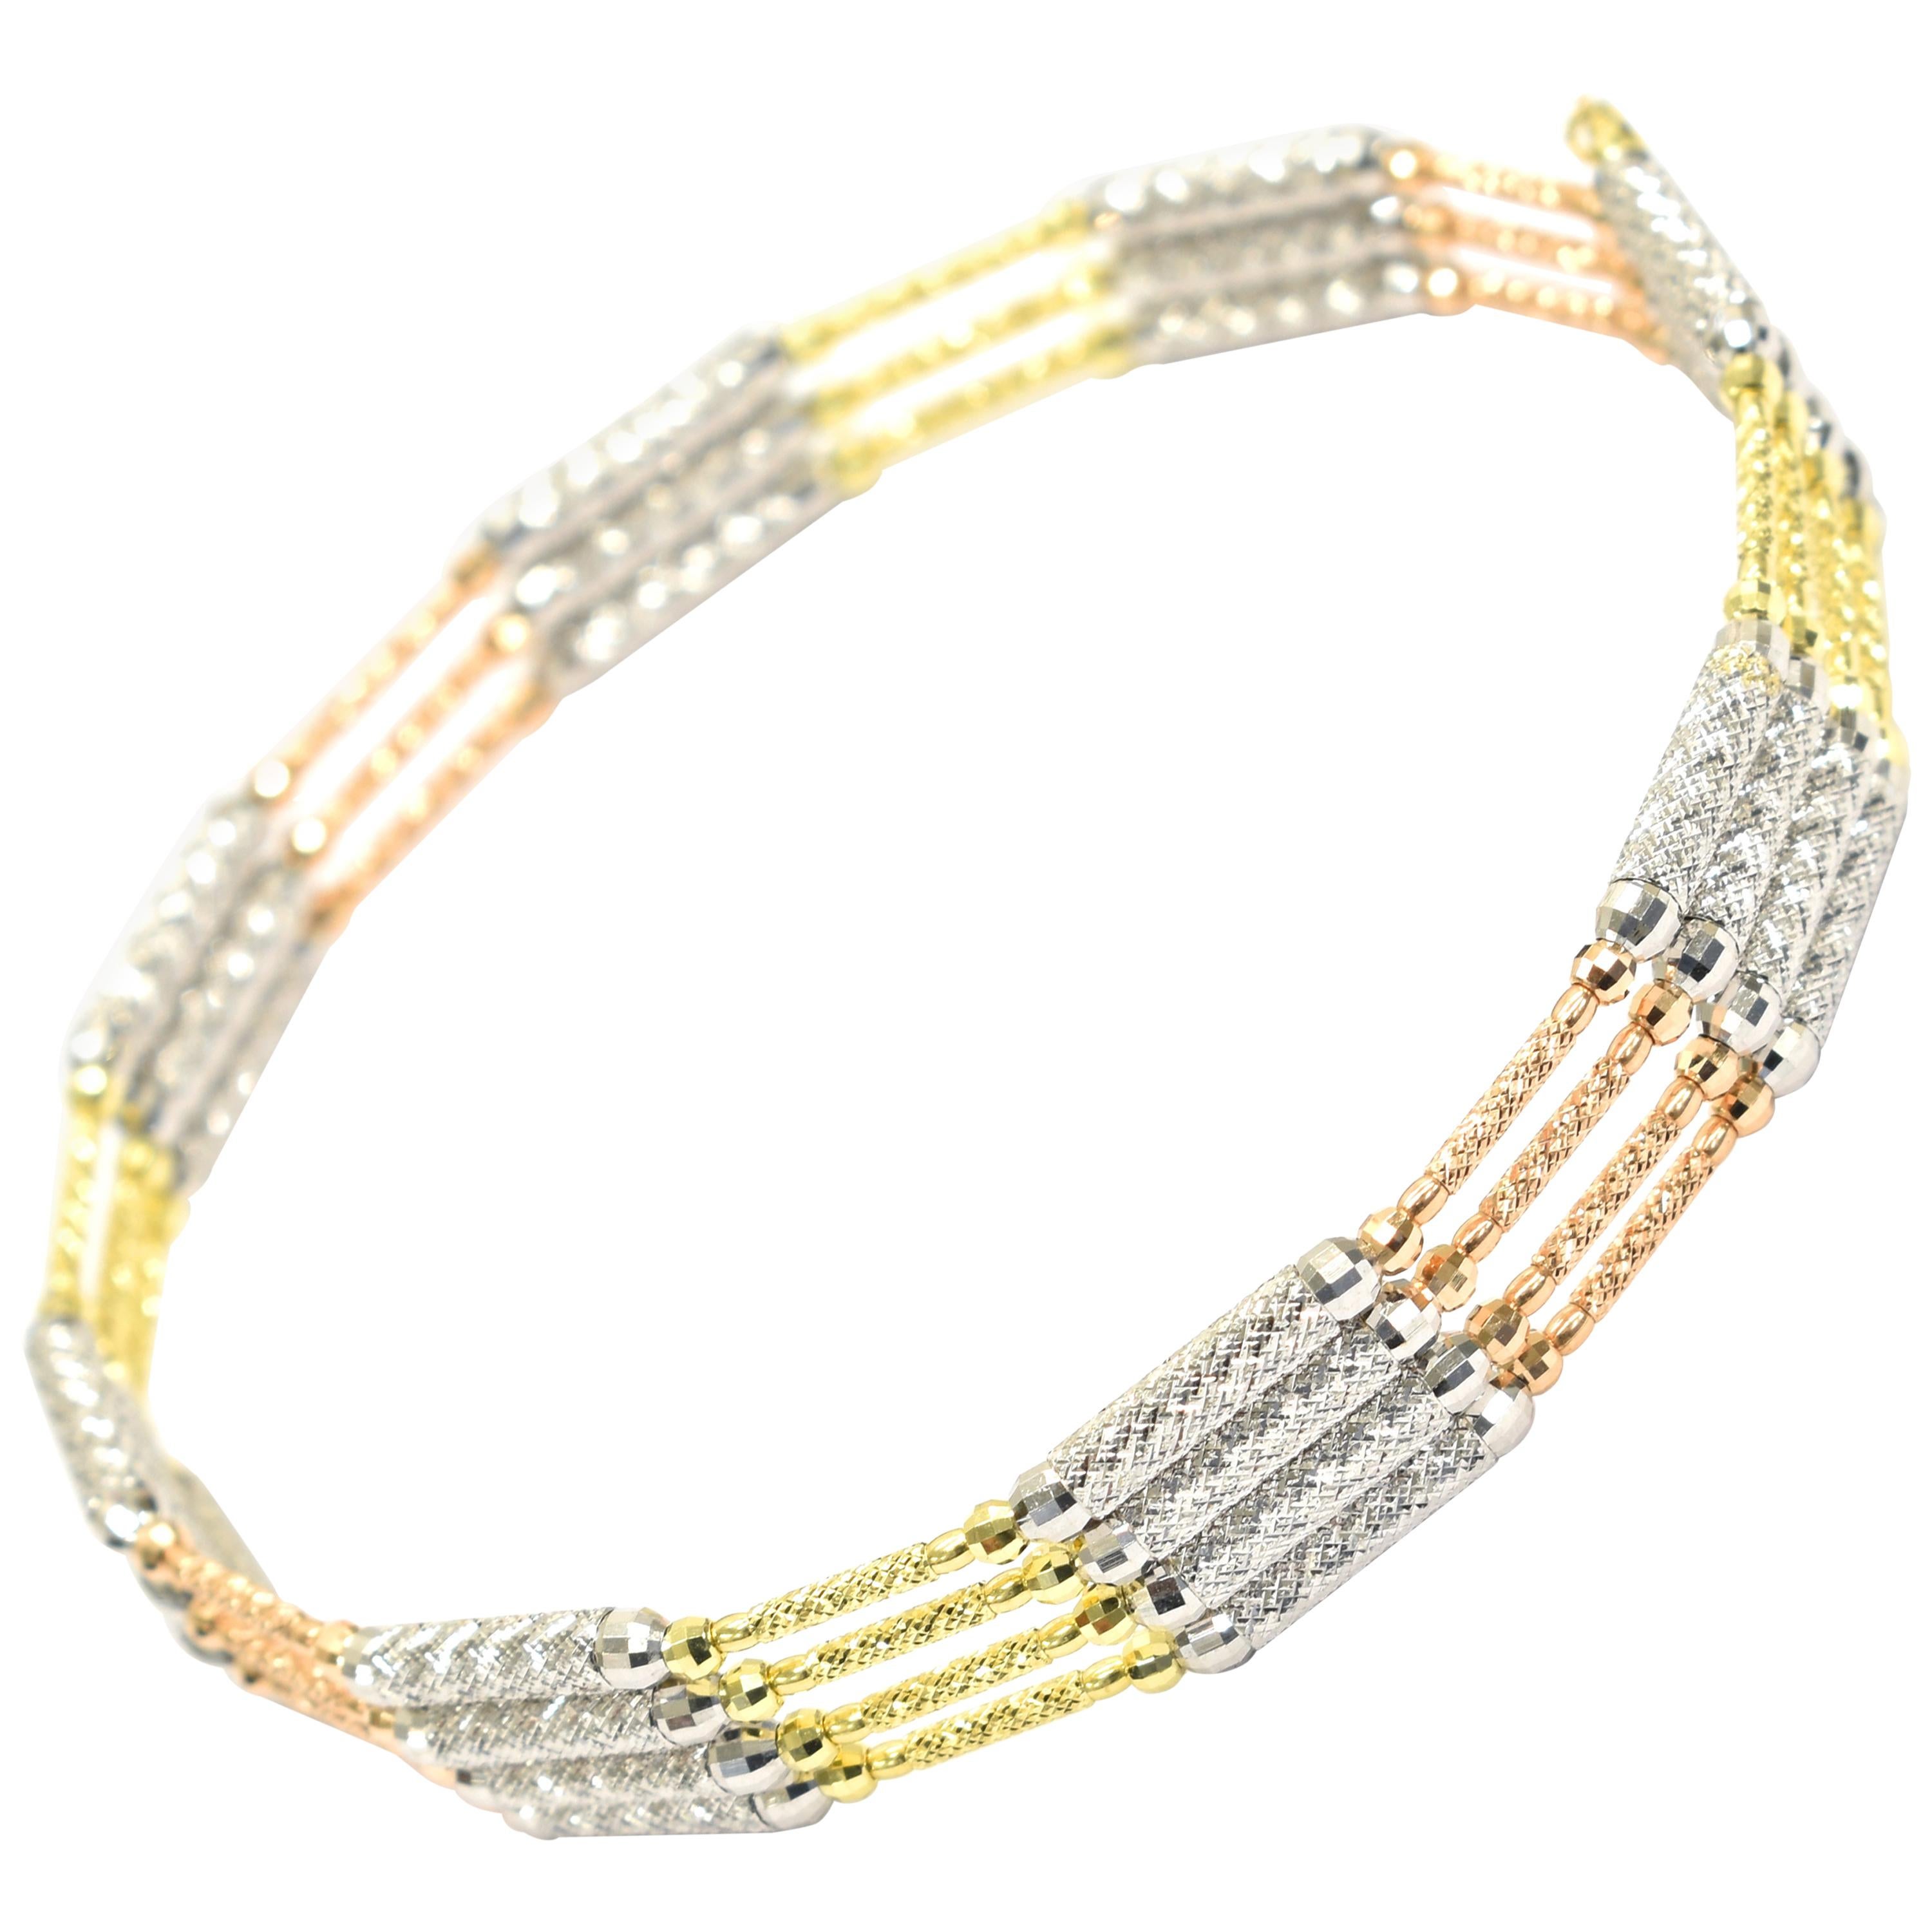 Multi Purpose Magnetic Bracelet/Necklace Made in 18 Karat Yellow/White/Rose Gold For Sale